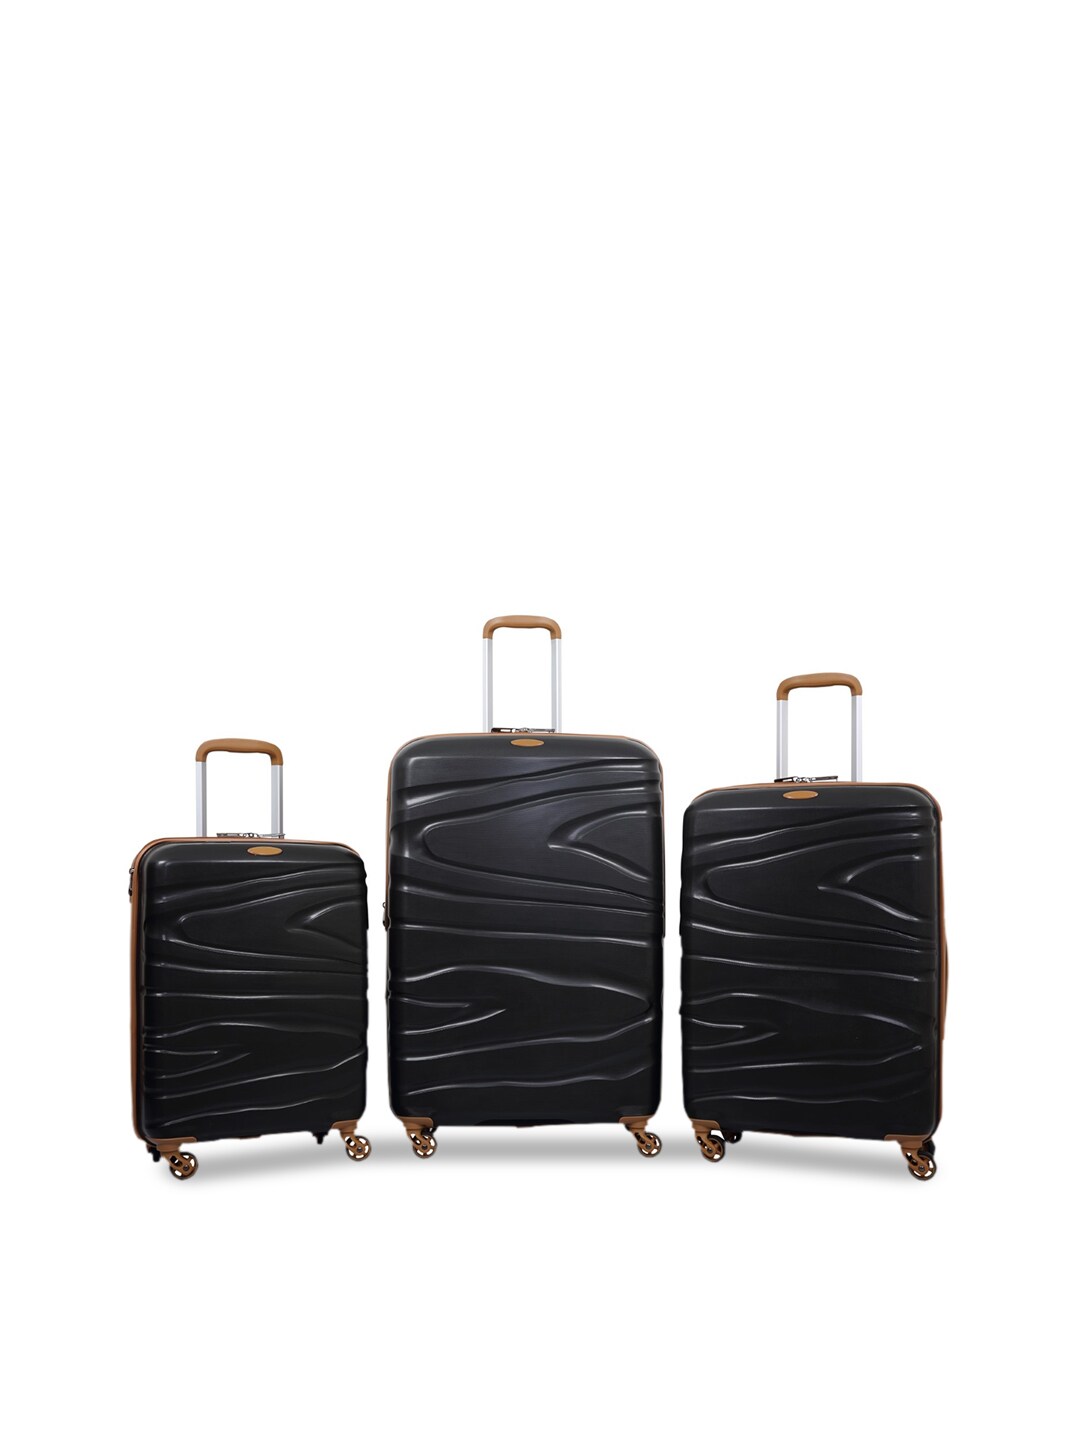 Polo Class Unisex Set of 3 Black Scan Trolley Bags Price in India